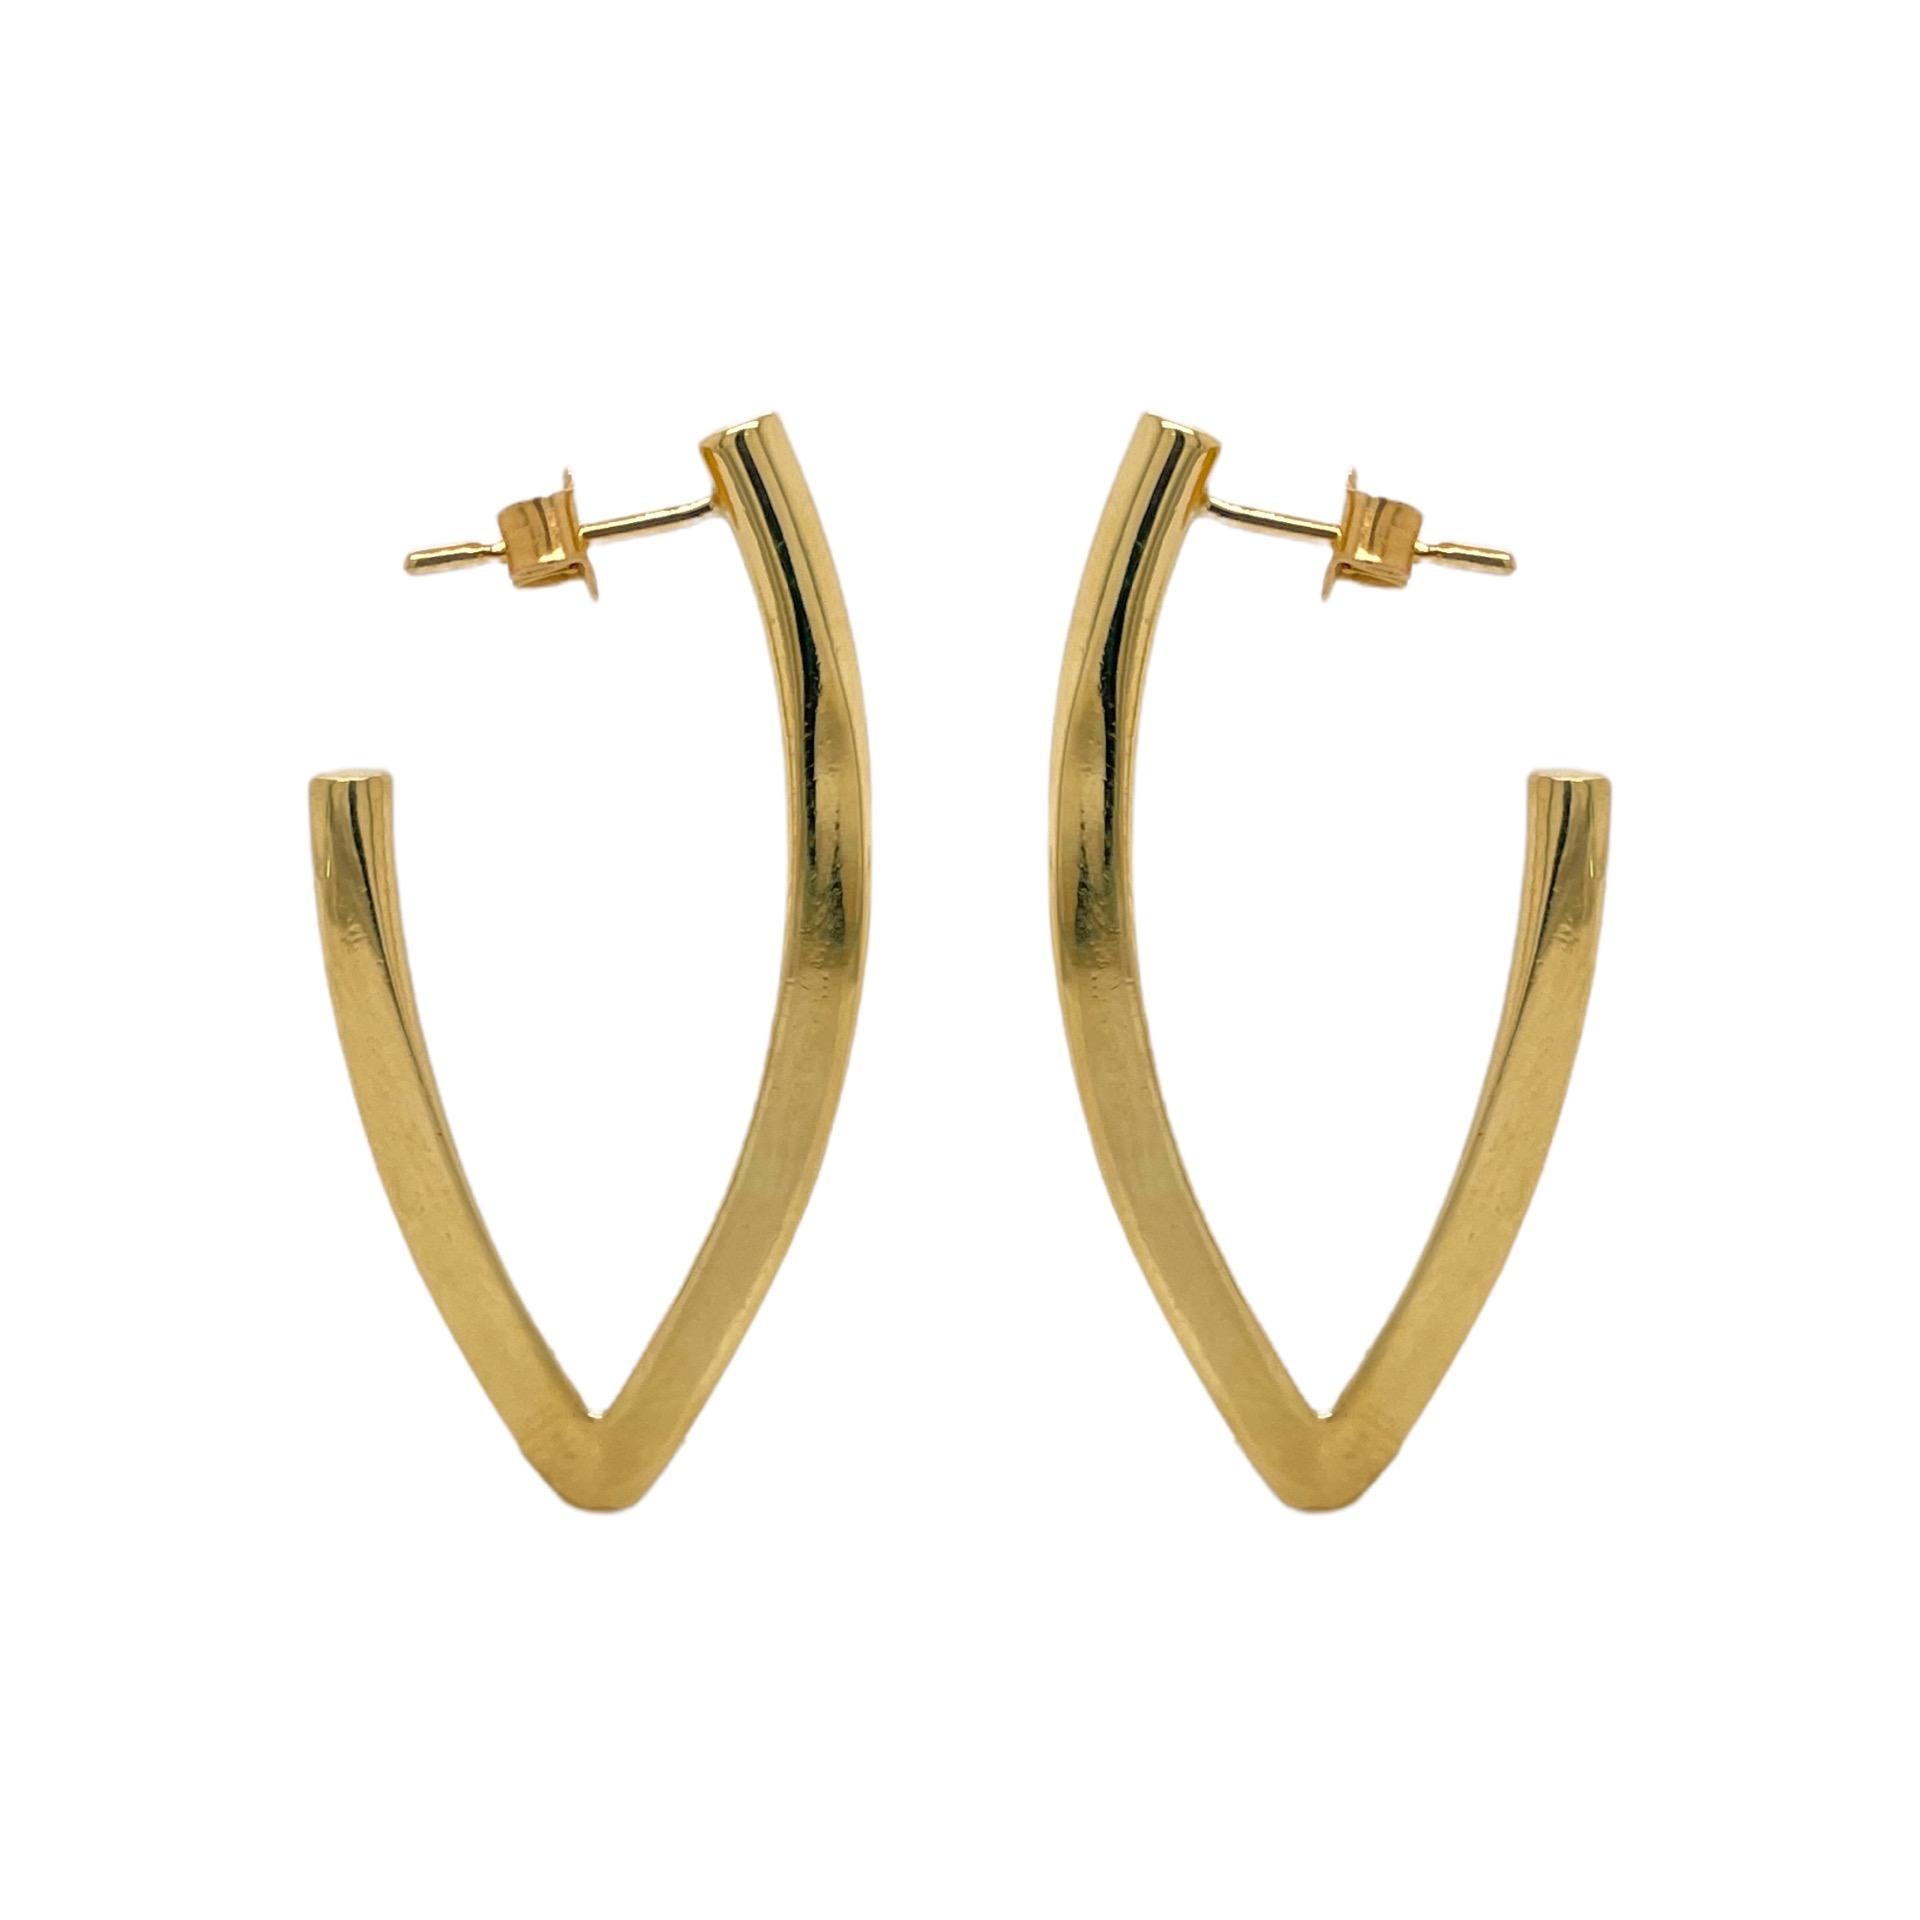 V-Shape hoop earring measures approximately 1.5'' in length and contains a post closure. Earring is created in solid 18k yellow gold and weighs 8.6 grams.  

All of our pieces are packaged carefully and accompanied by a Pico pouch to keep your